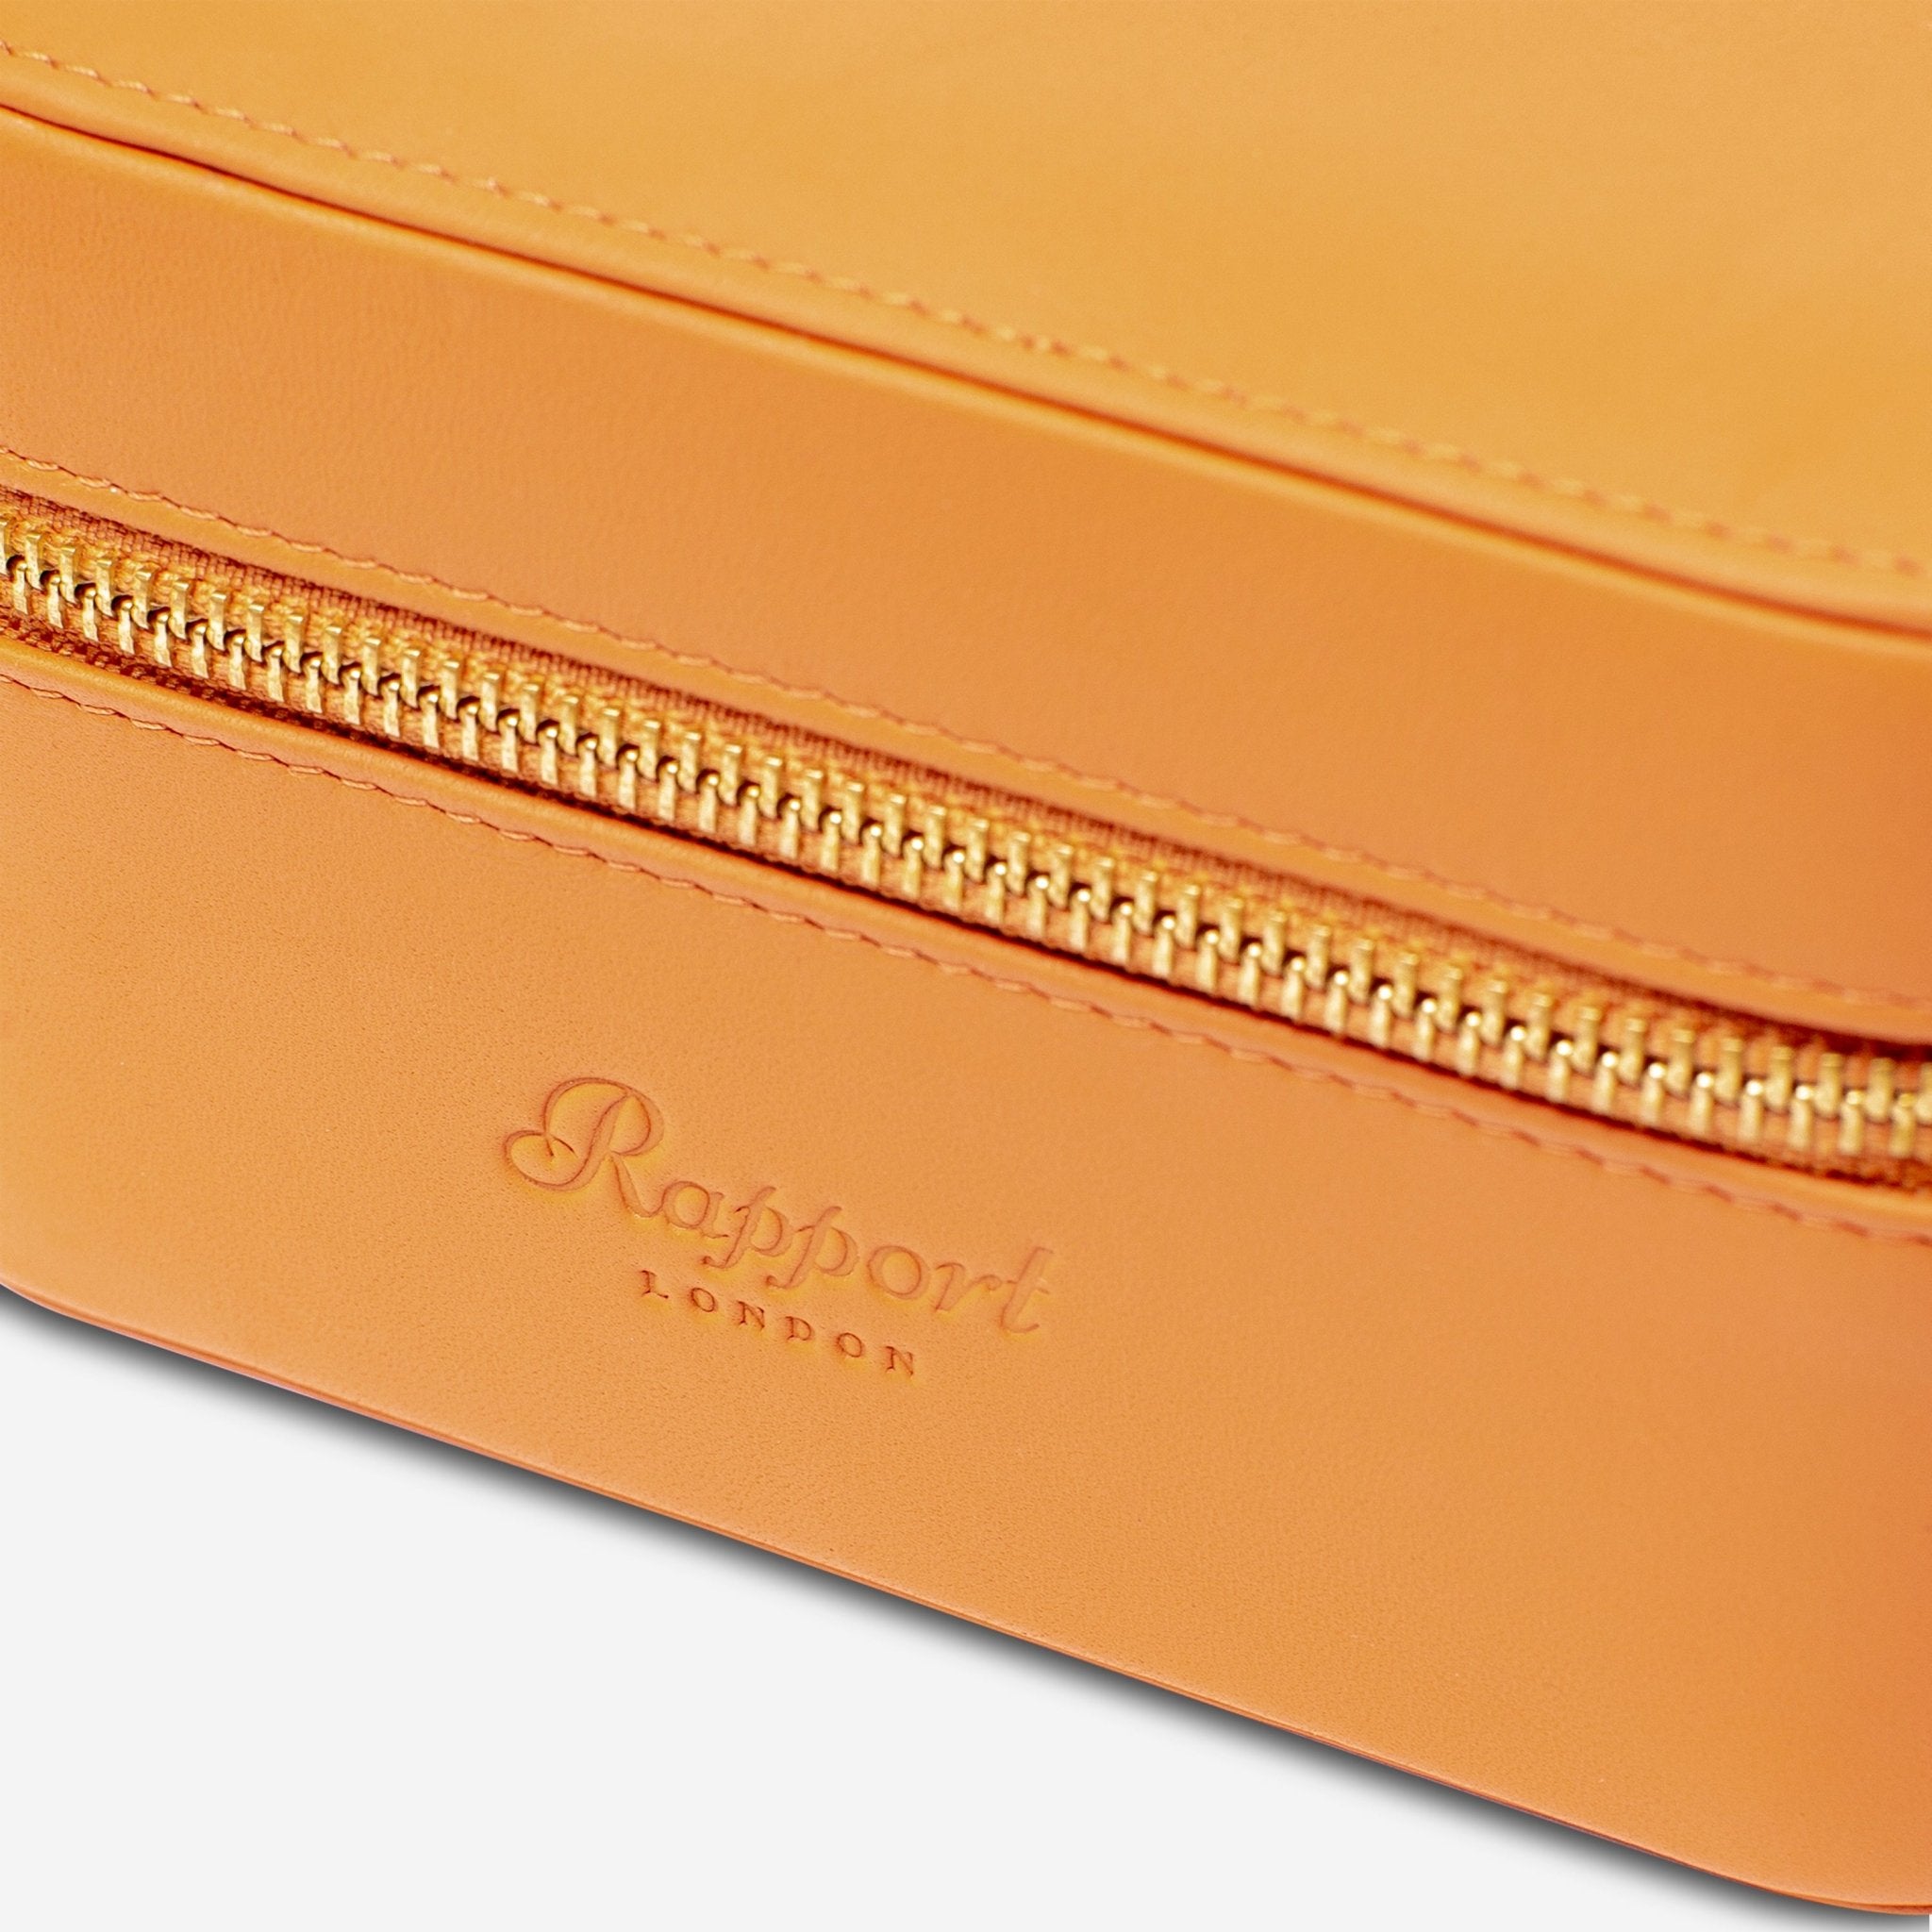 Rapport London Hyde Park Tan Smooth Leather Four Watch Zip Case D272 - THE SOLIST - Rapport